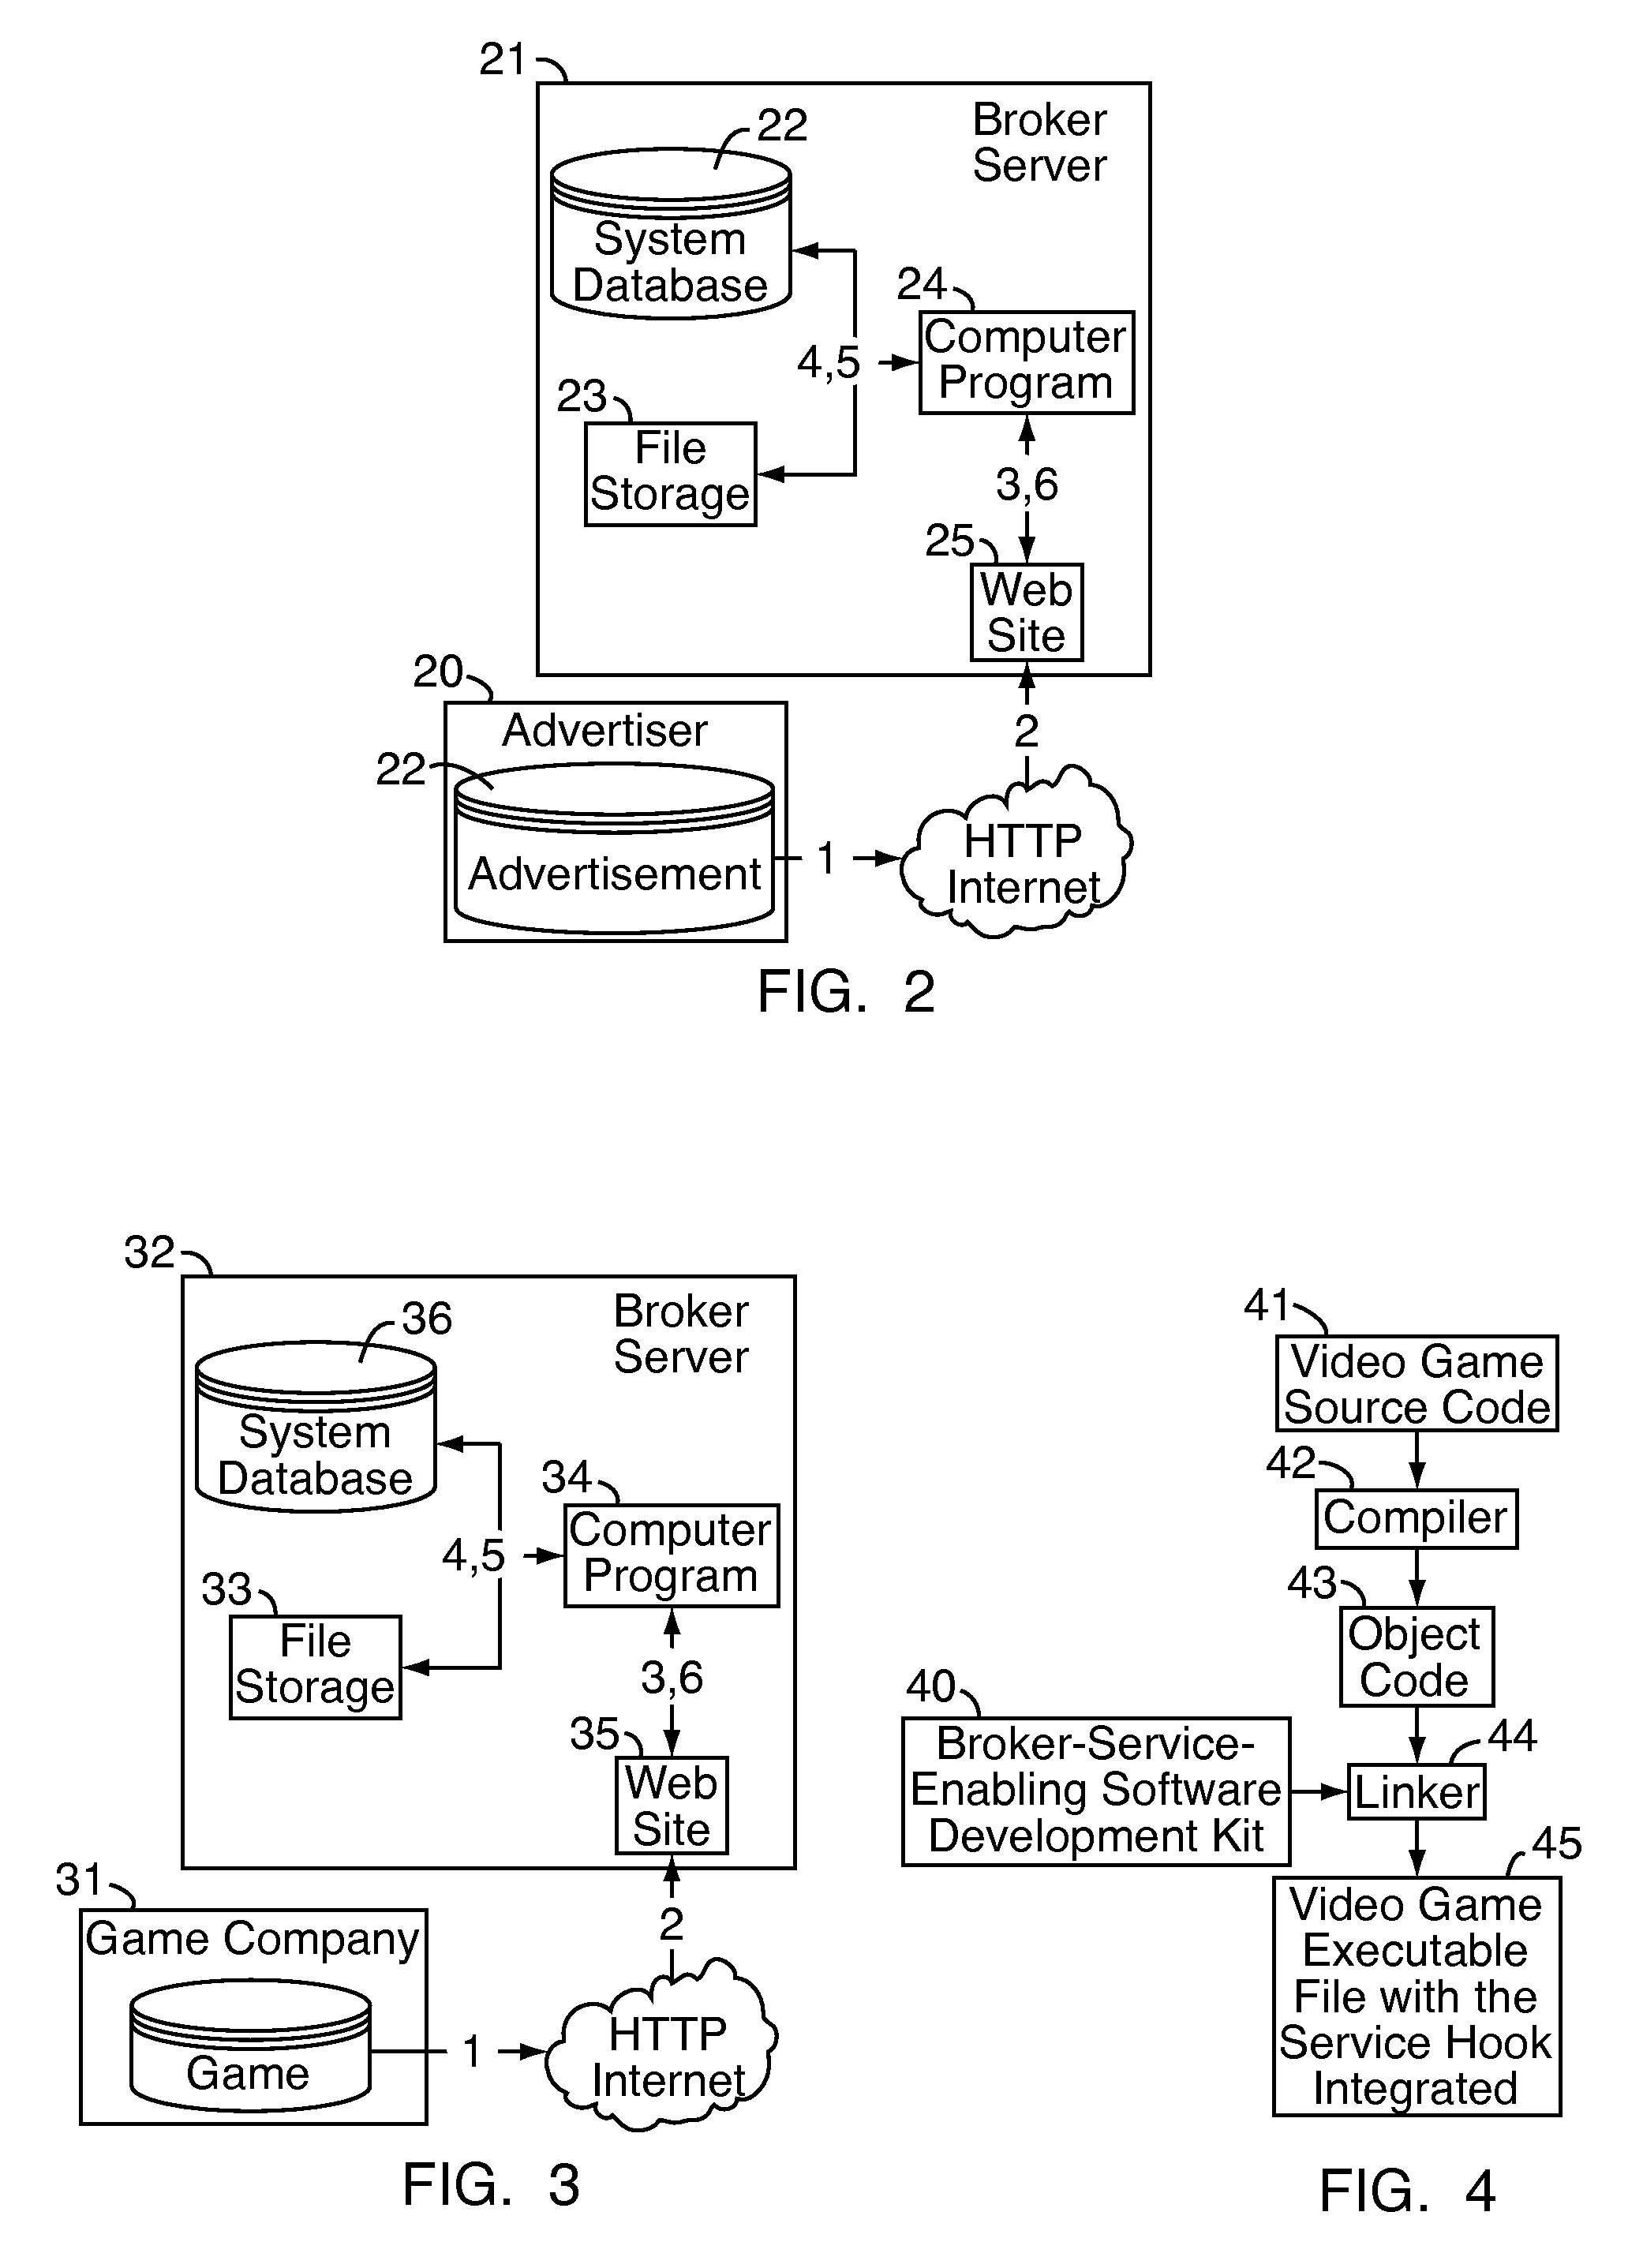 System and method for enabling advertisers to purchase advertisement space in video games